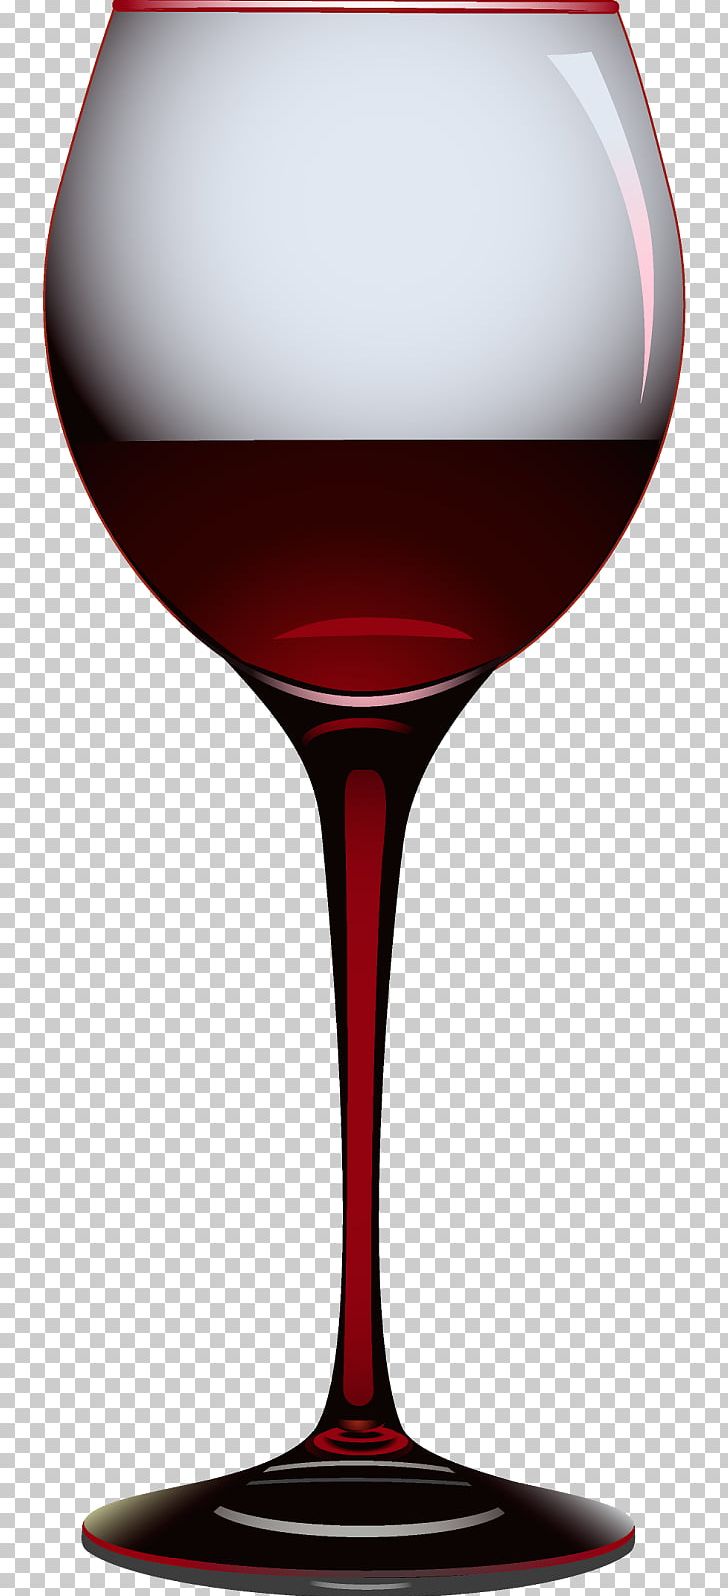 Wine Glass Red Wine Champagne Glass Cartoon PNG, Clipart, Cartoon, Champagne Glass, Champagne Stemware, Drinkware, Food Drinks Free PNG Download